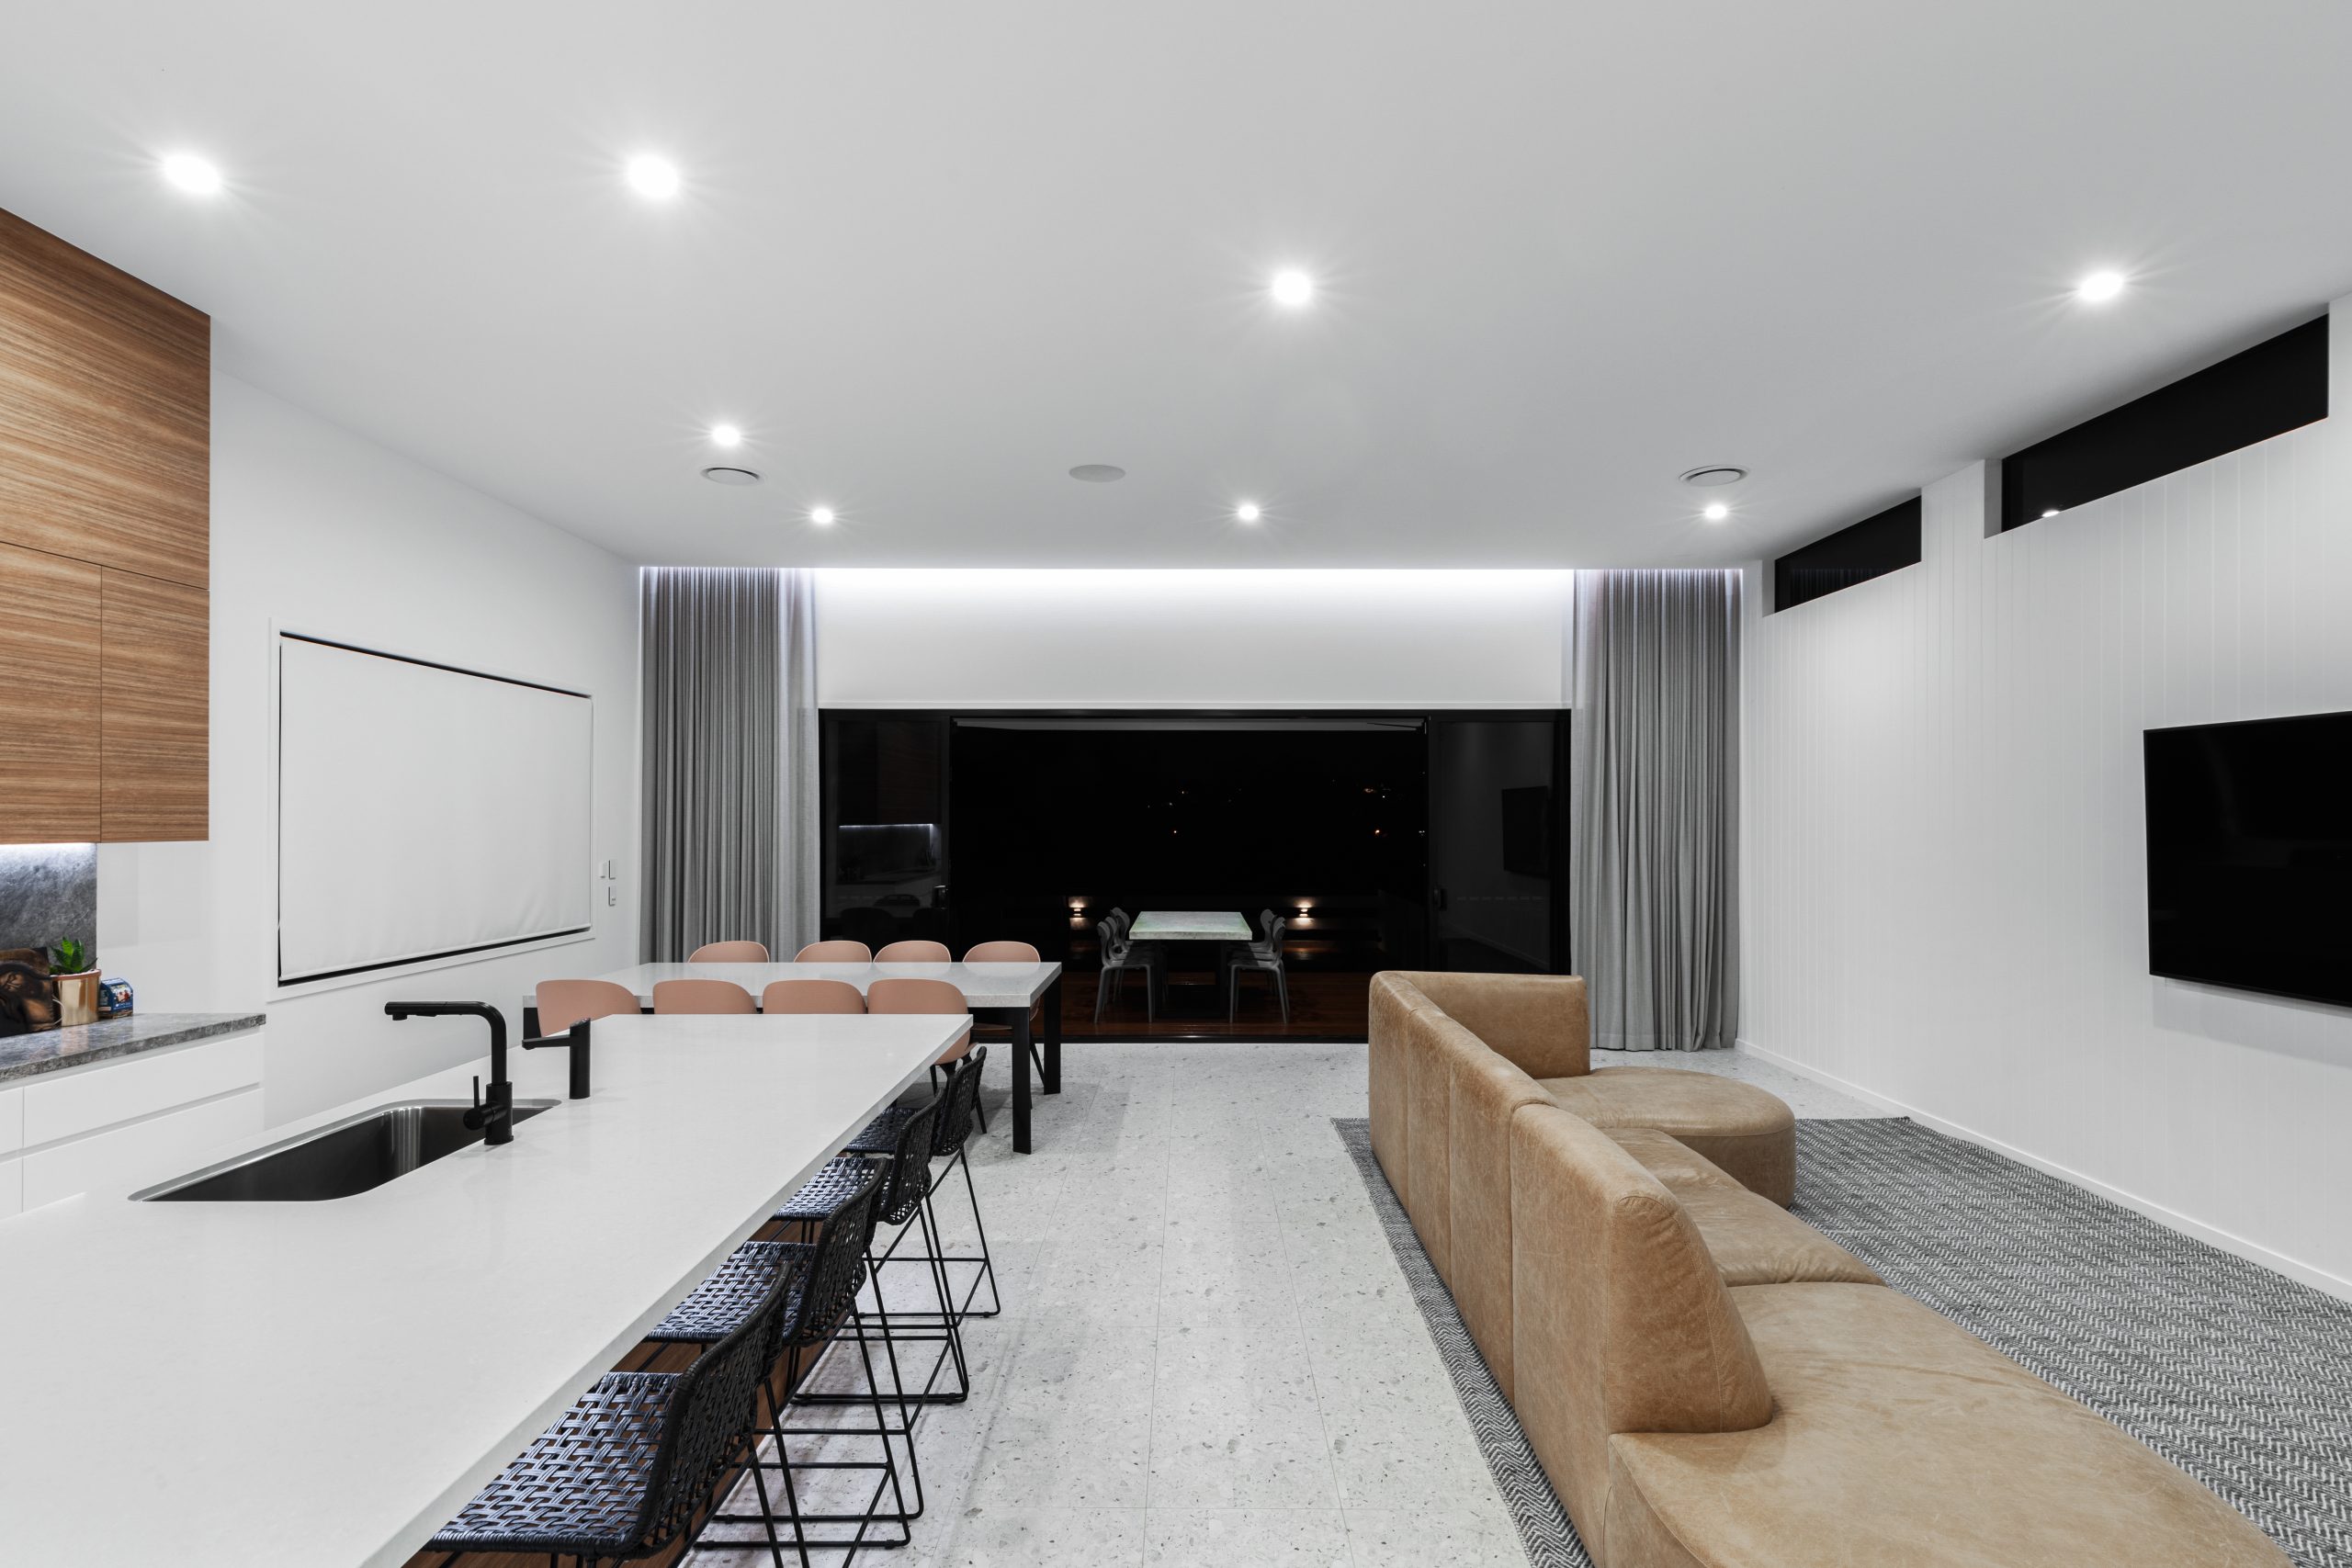 Interior View of Modern White Kitchen & Living Room | Featured Image for the Qualis Collaboration Blog from Blindo